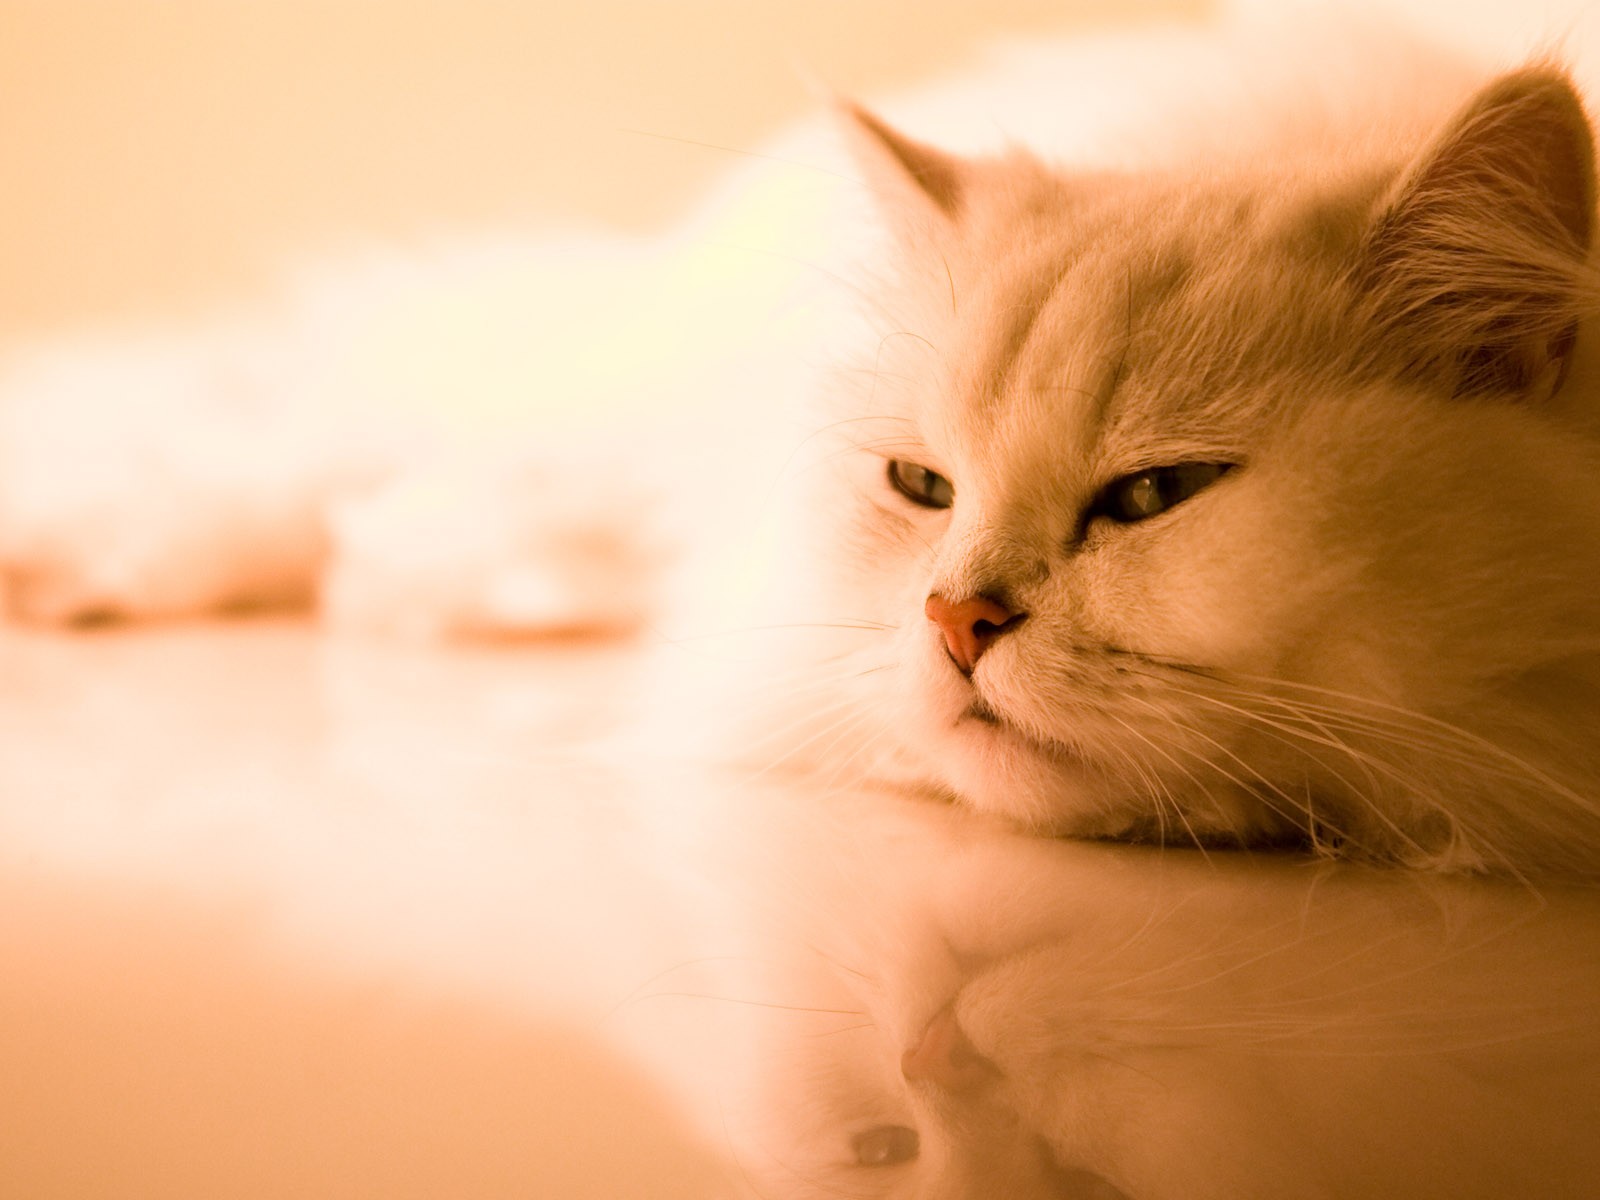 Cat photo HD Wallpapers #35 - 1600x1200